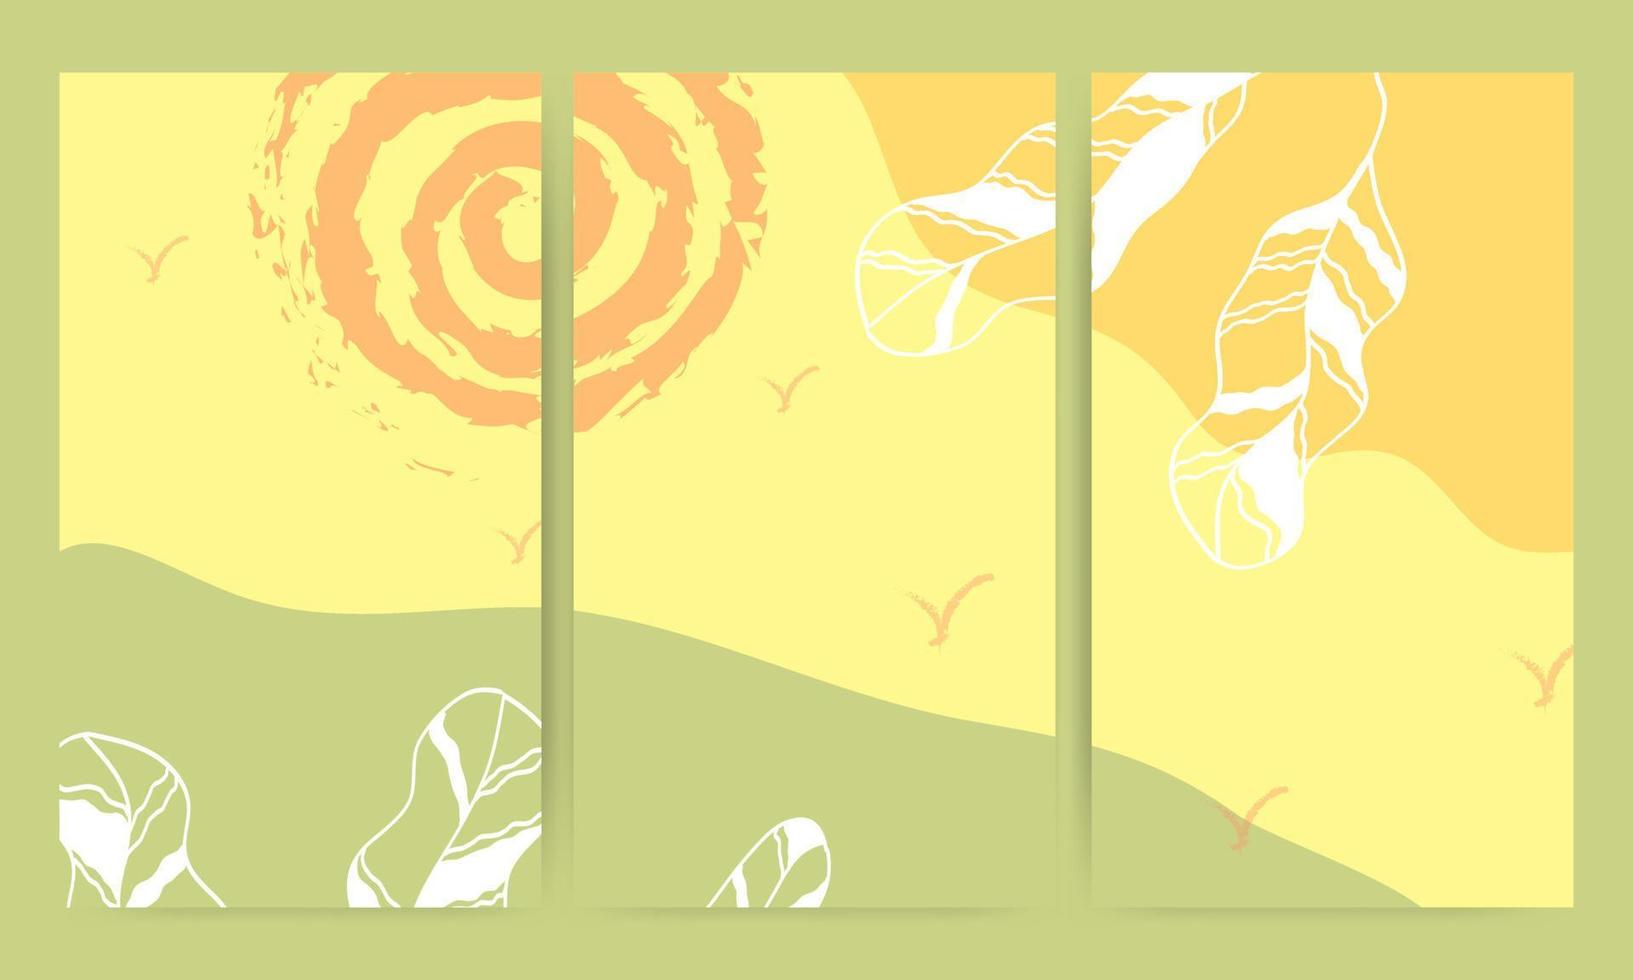 abstract backgrounds with foliage elements vector